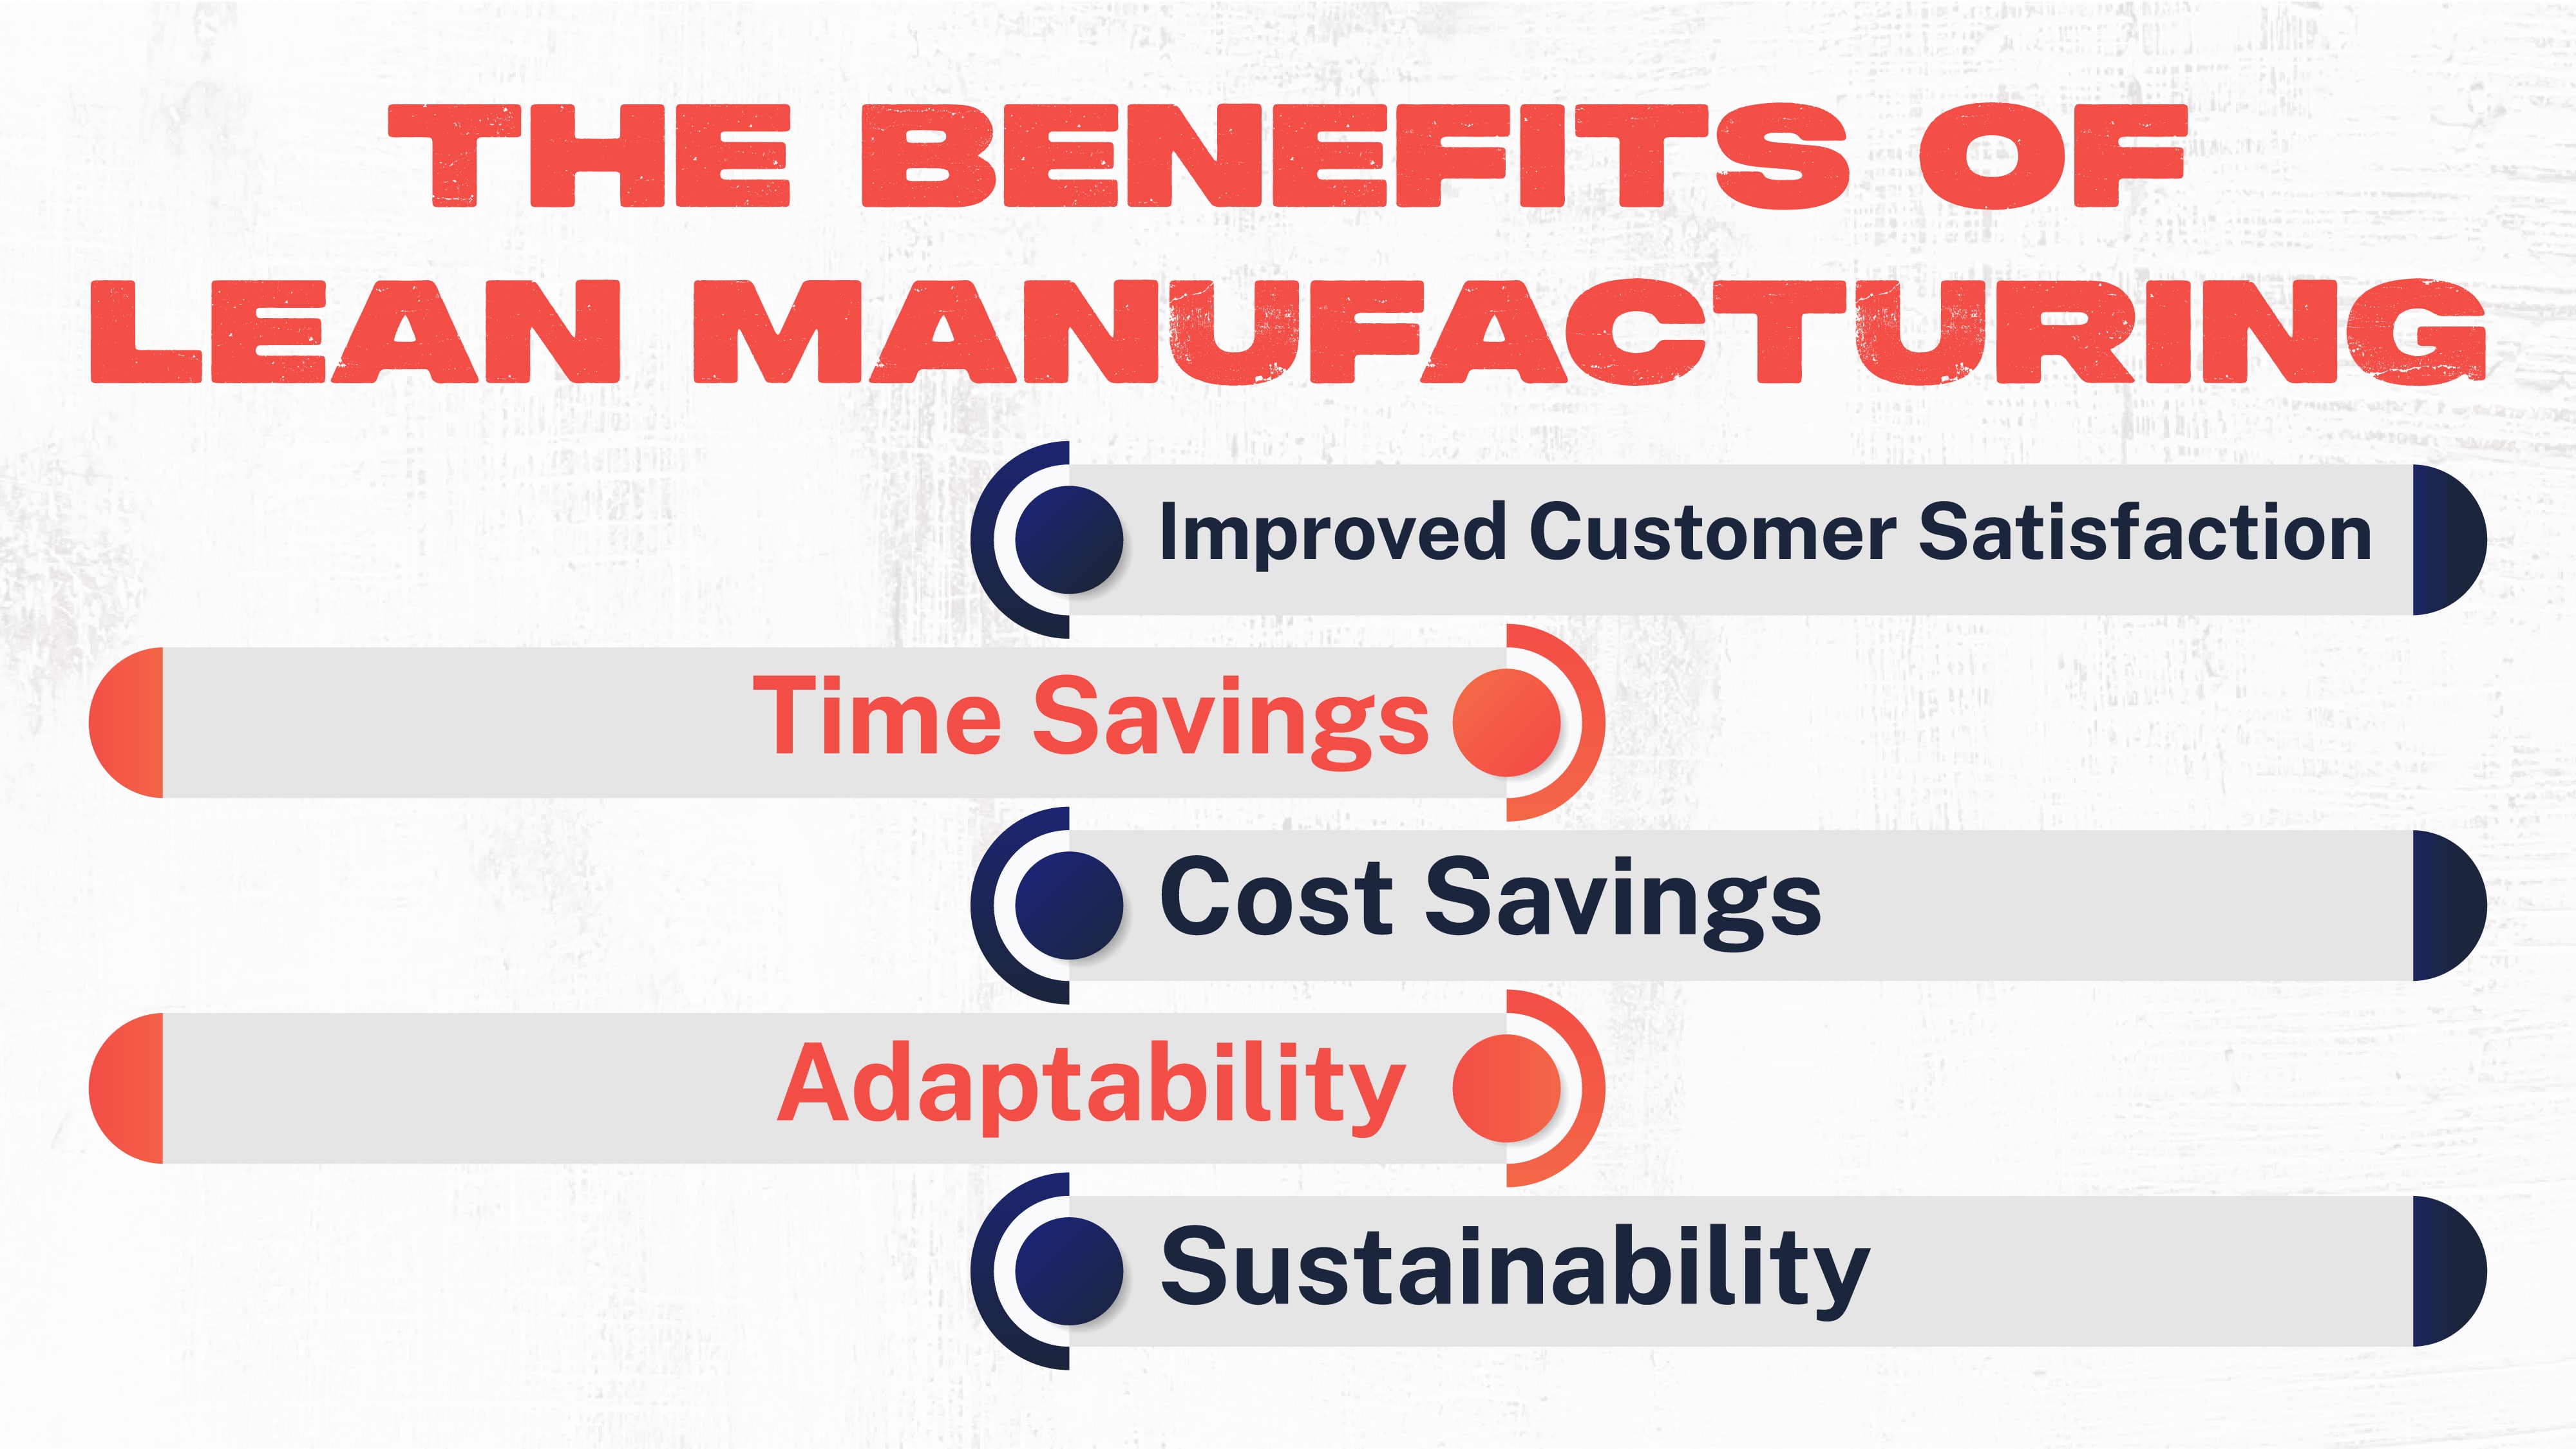 The Benefits of Lean Manufacturing